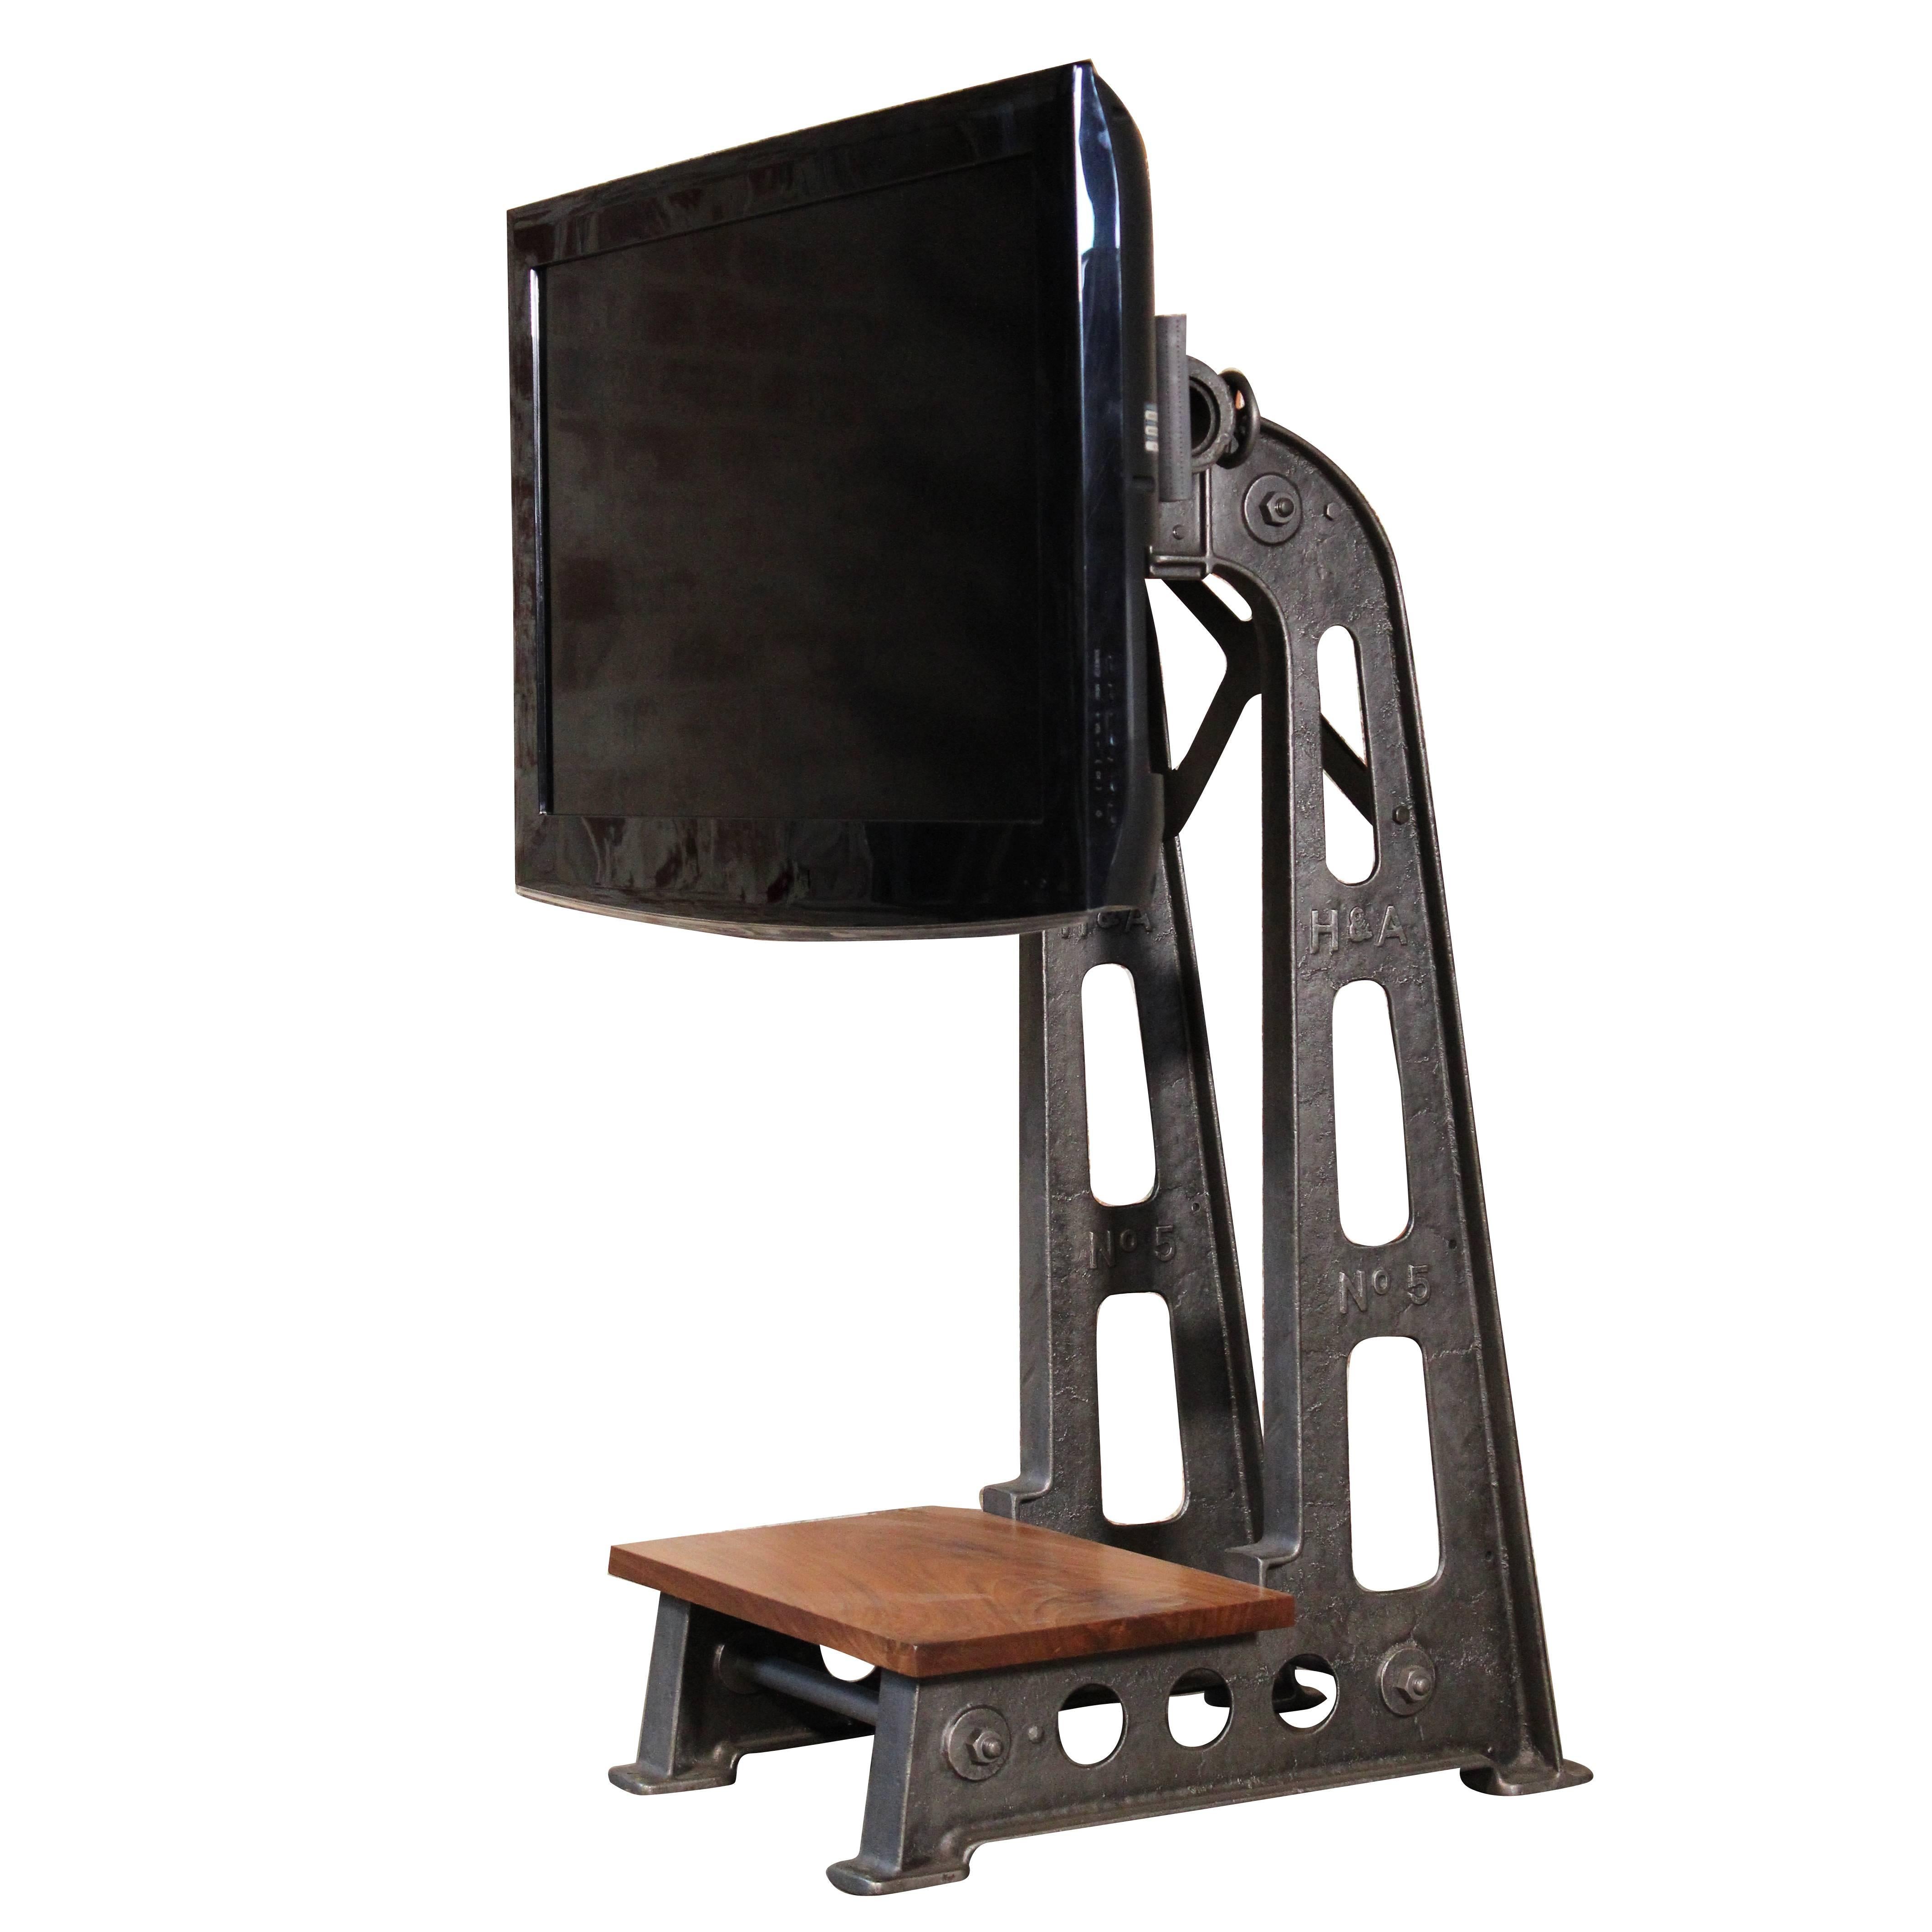 Flat Screen TV Stand Vintage Industrial Cast Iron Media Screen Display Table